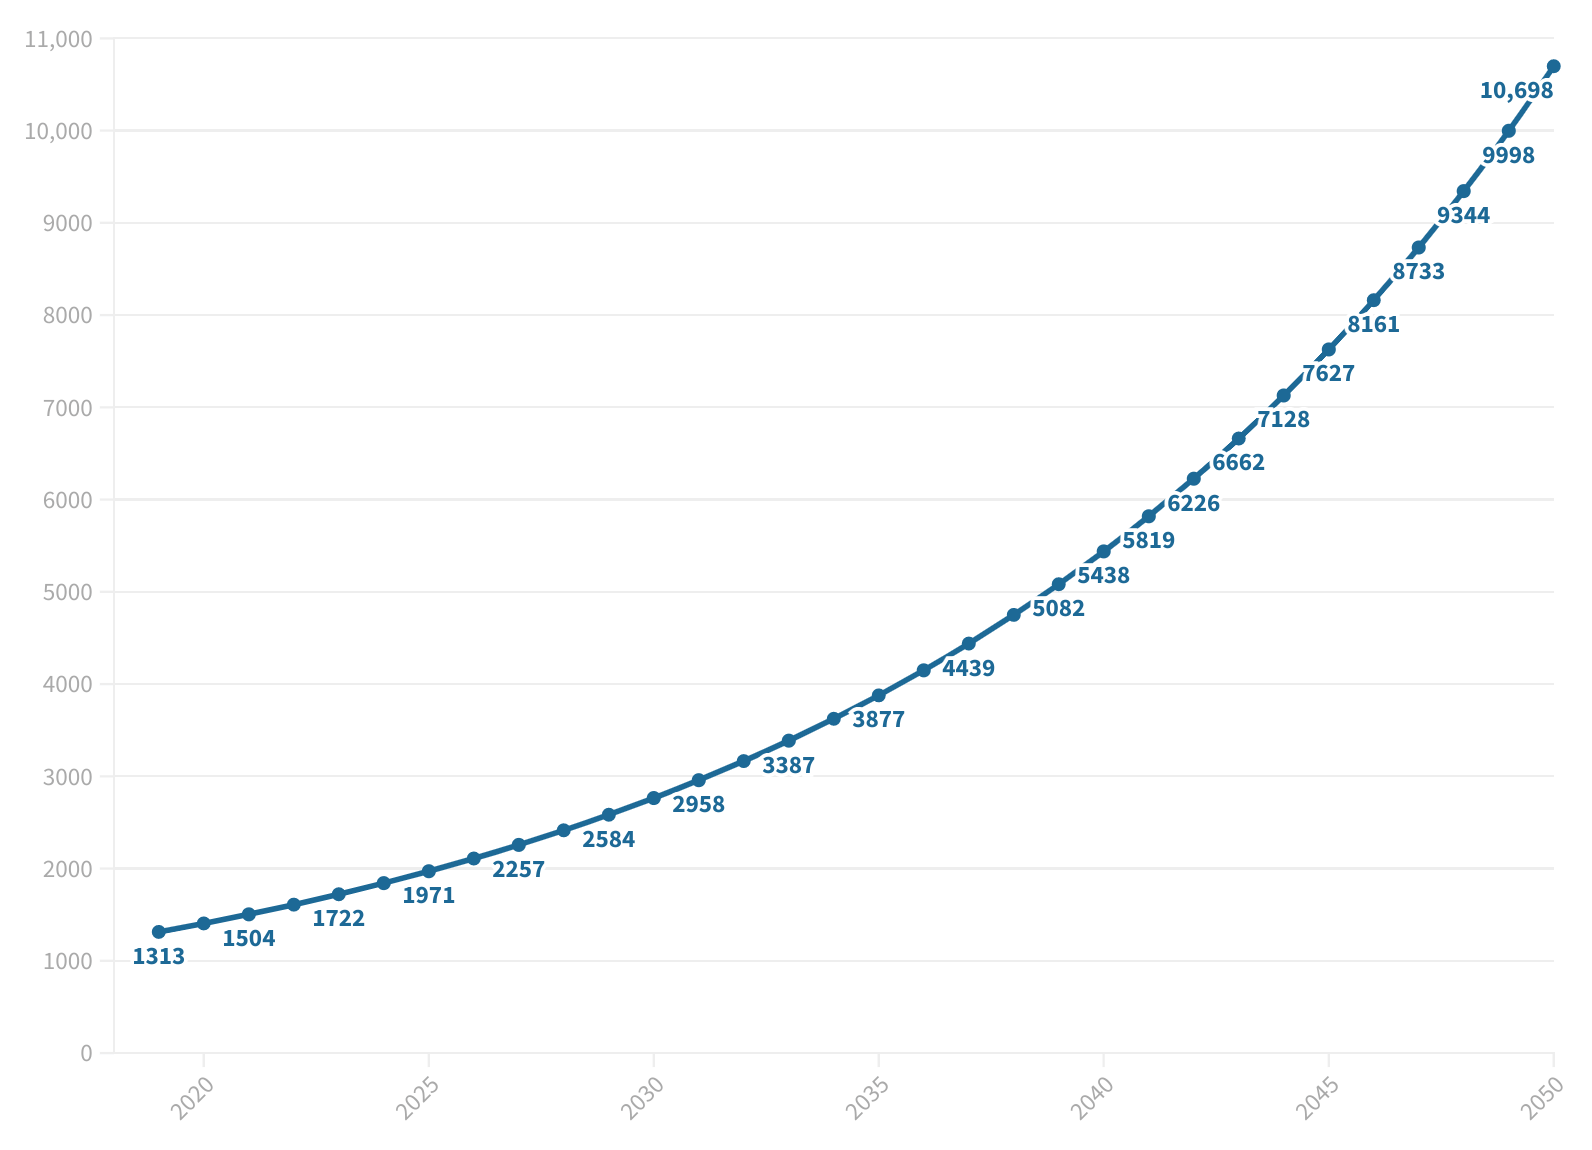 Line graph of the estimated global costs of dementia showing an ever increasing trend reaching USD 10.69 trillion in 2050